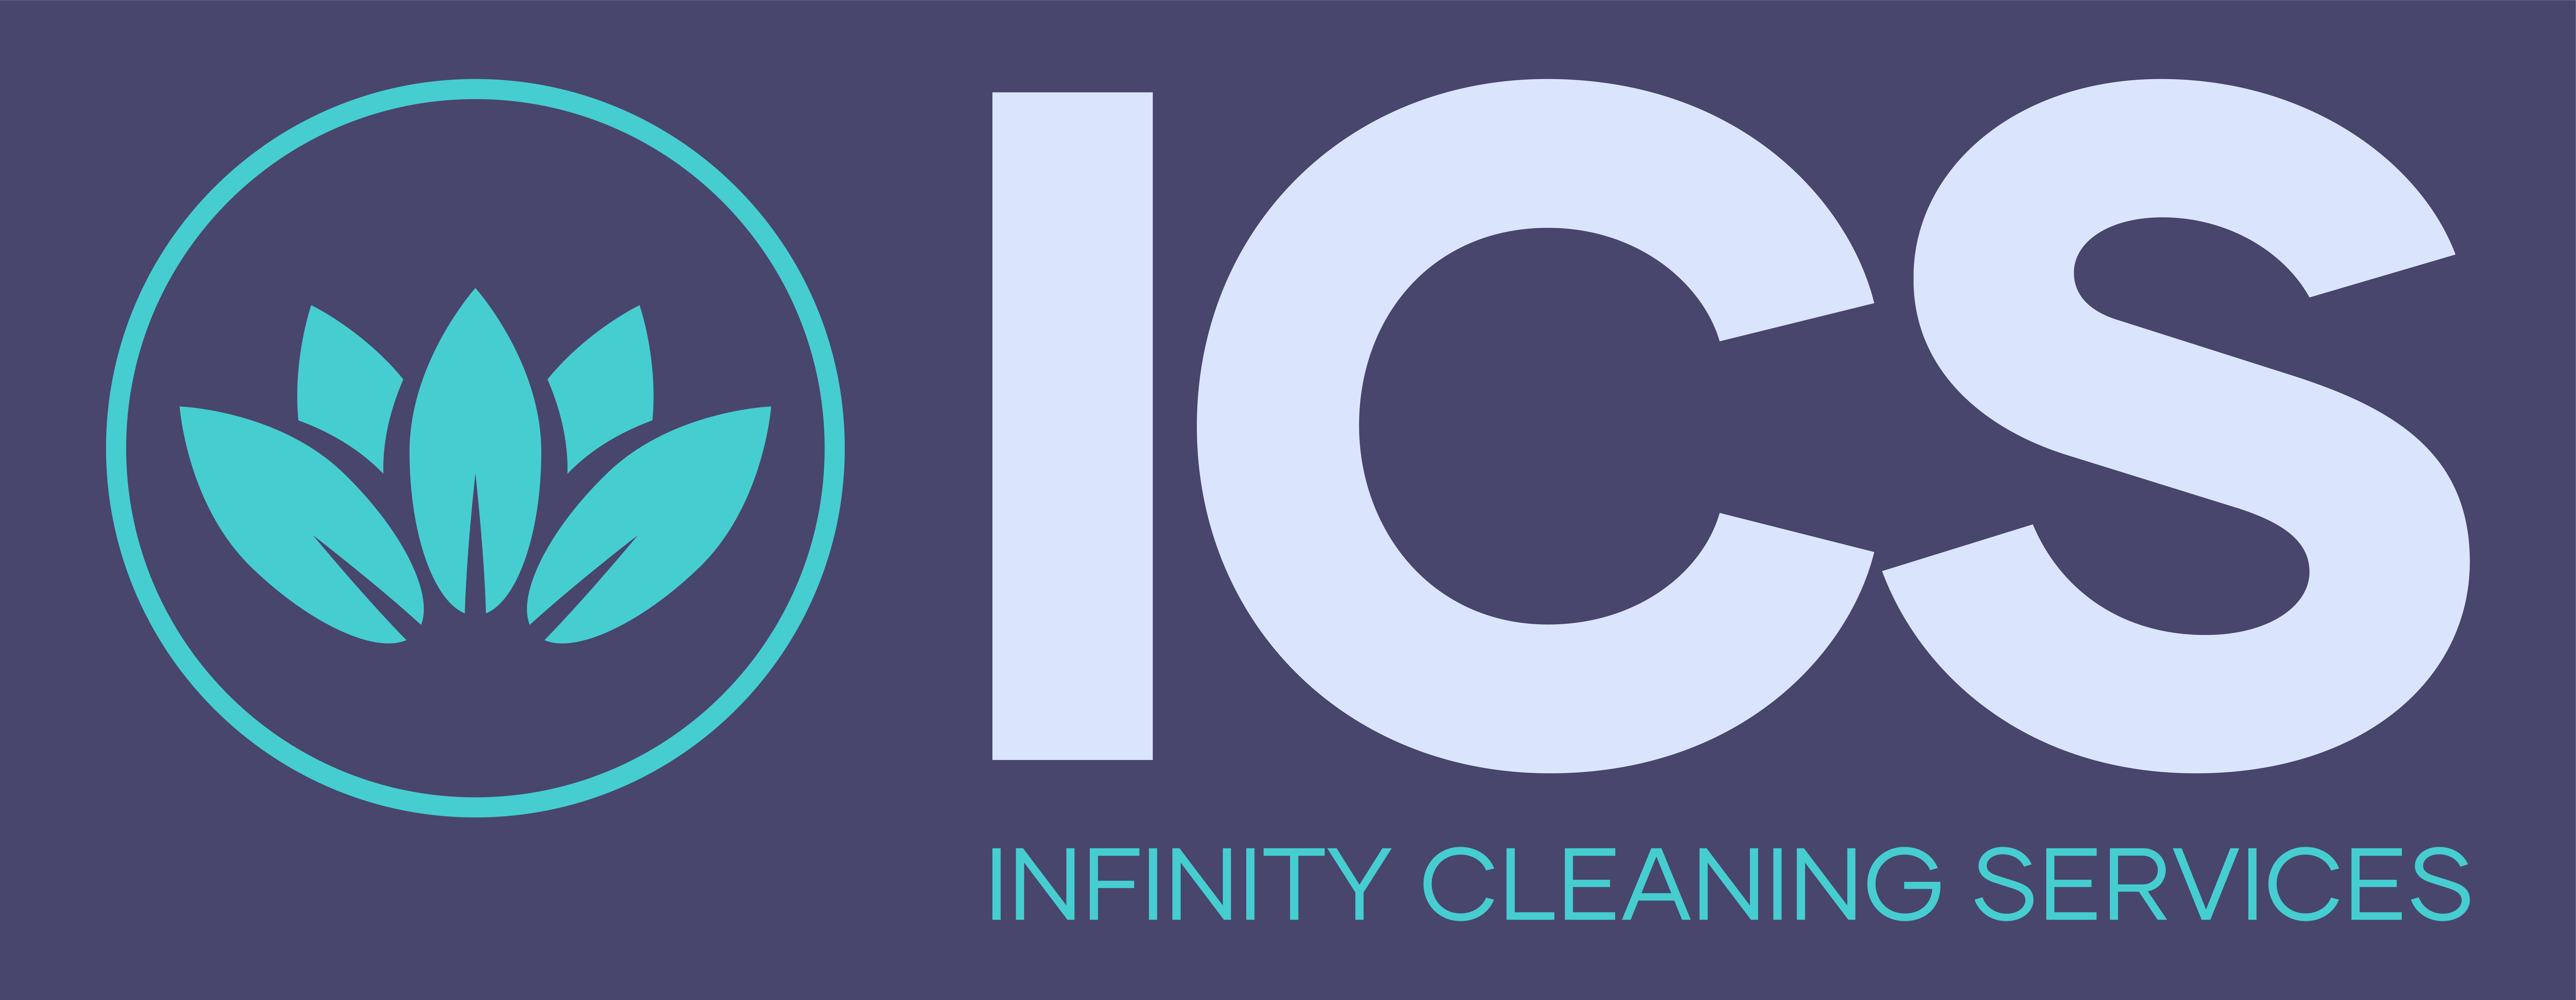 logo for Infinity Cleaning Services Ltd